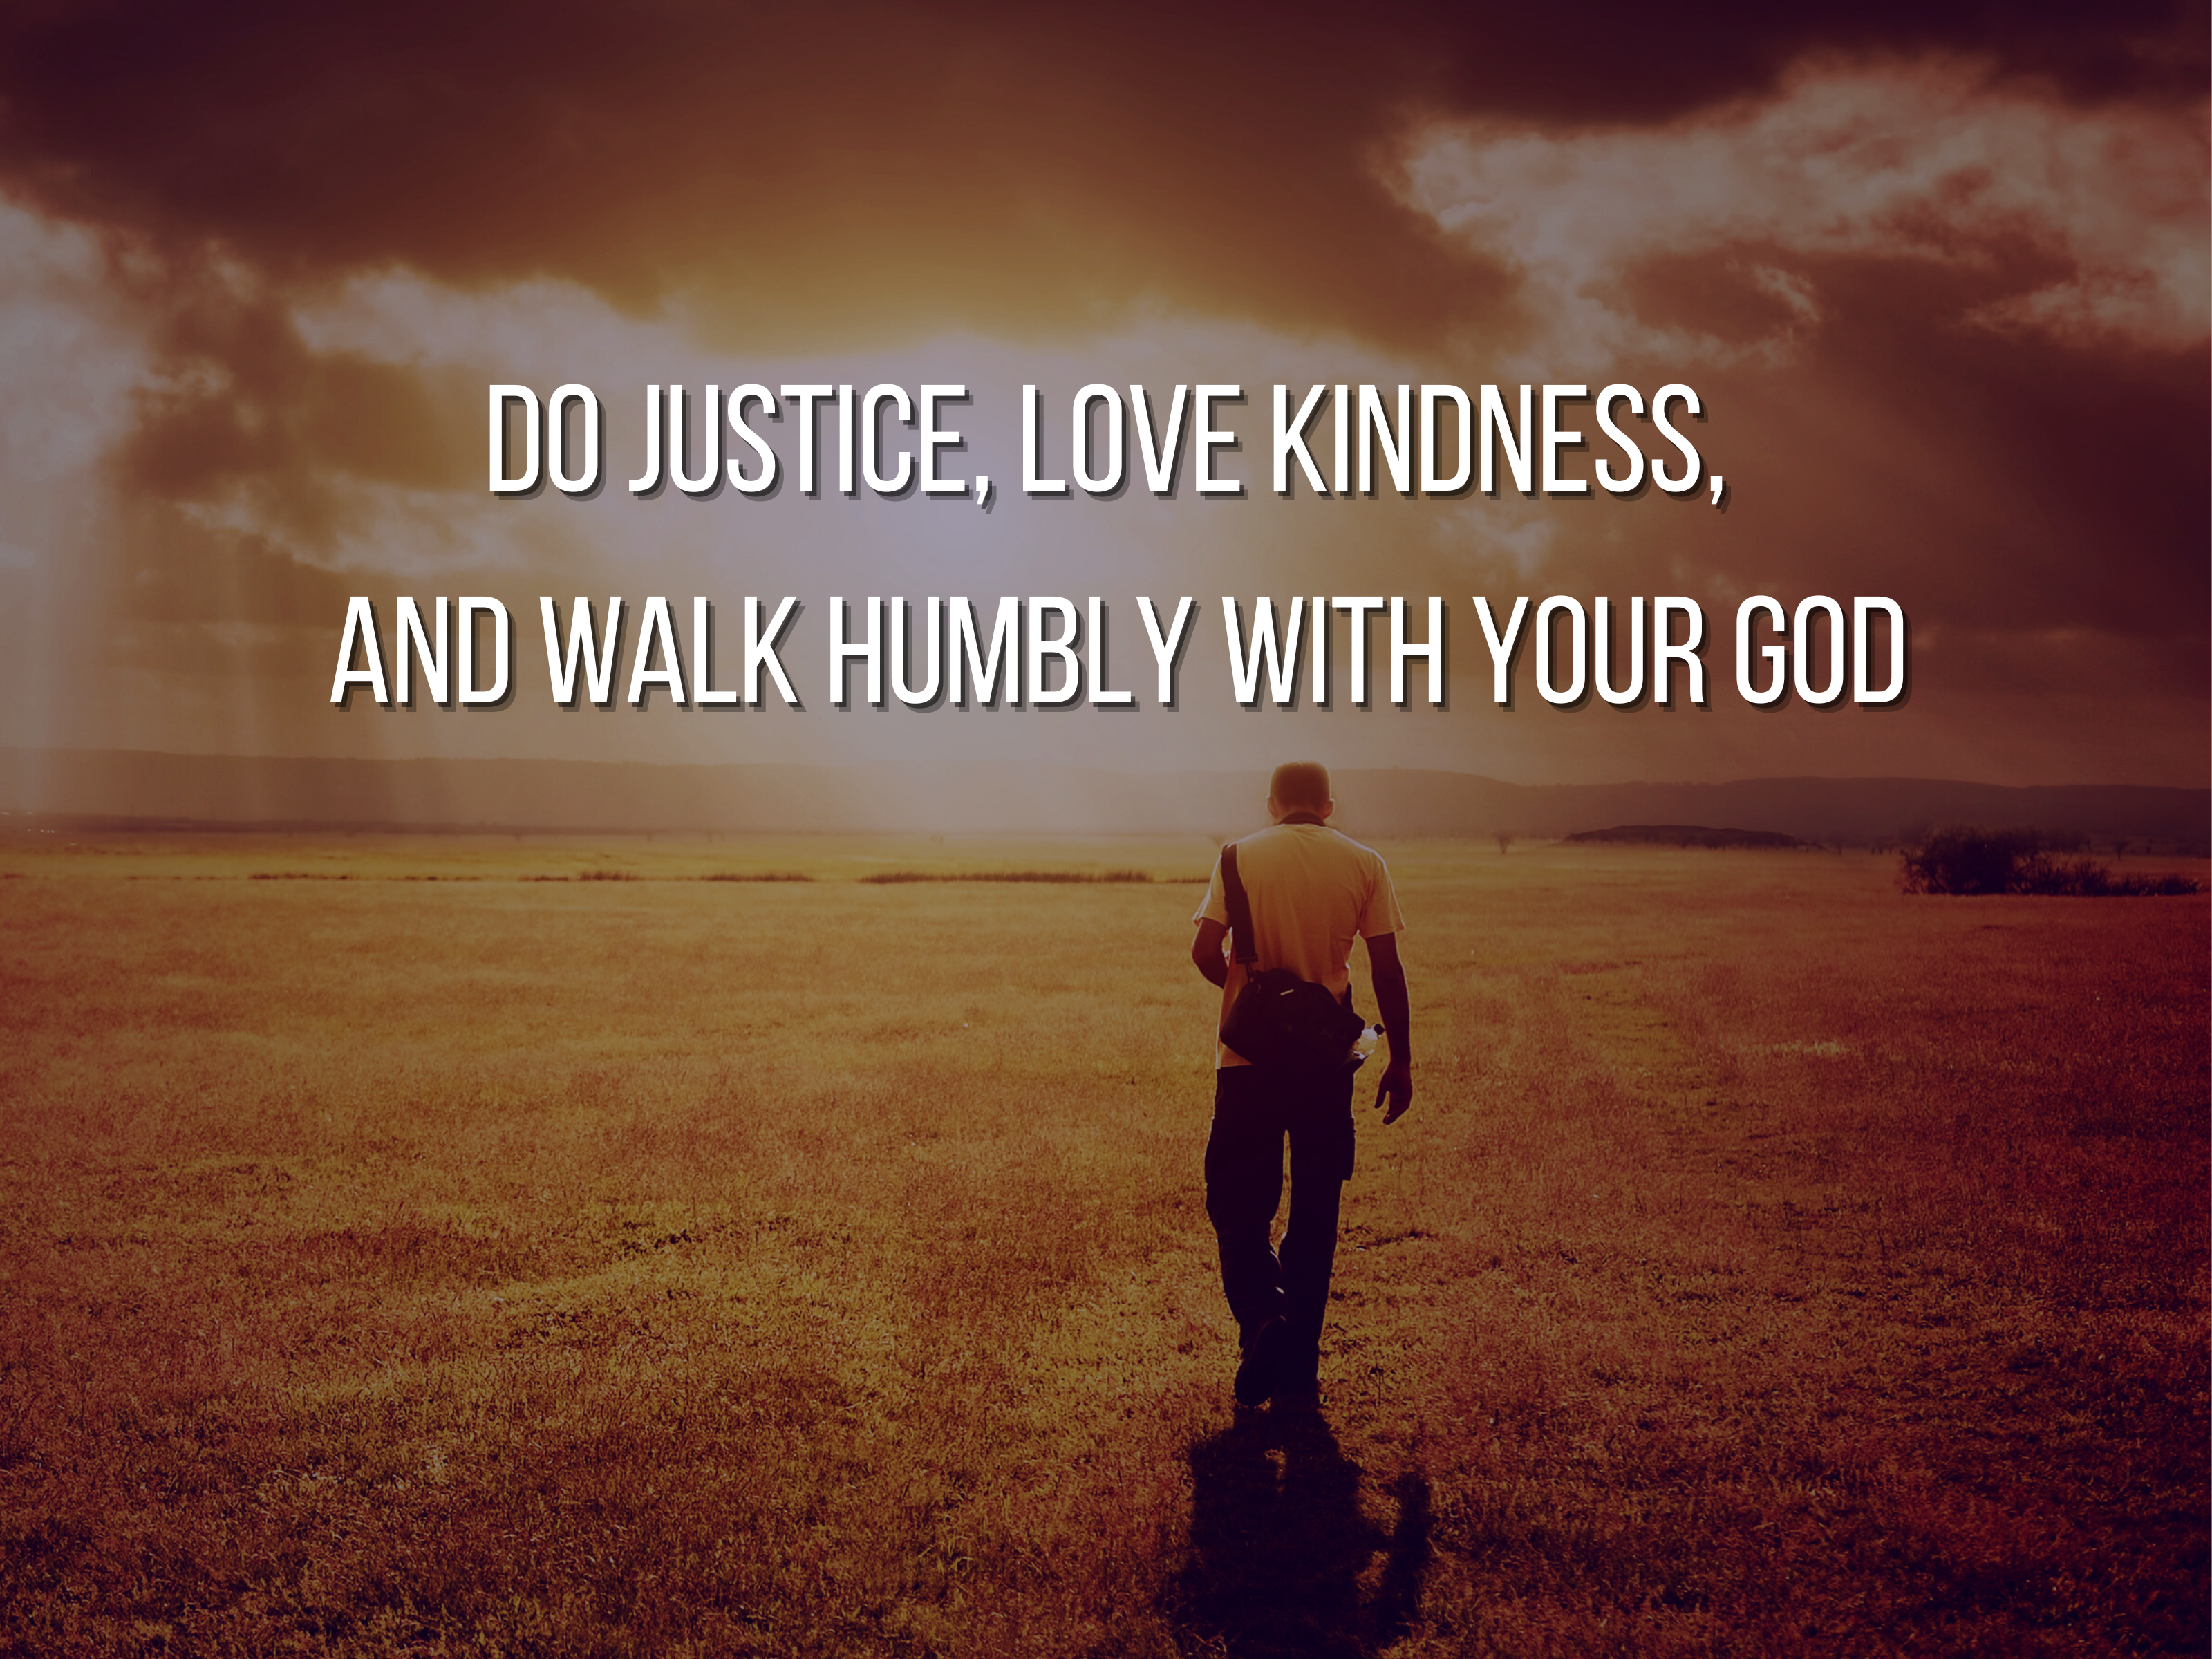 Micah 6:8 (from Canva)